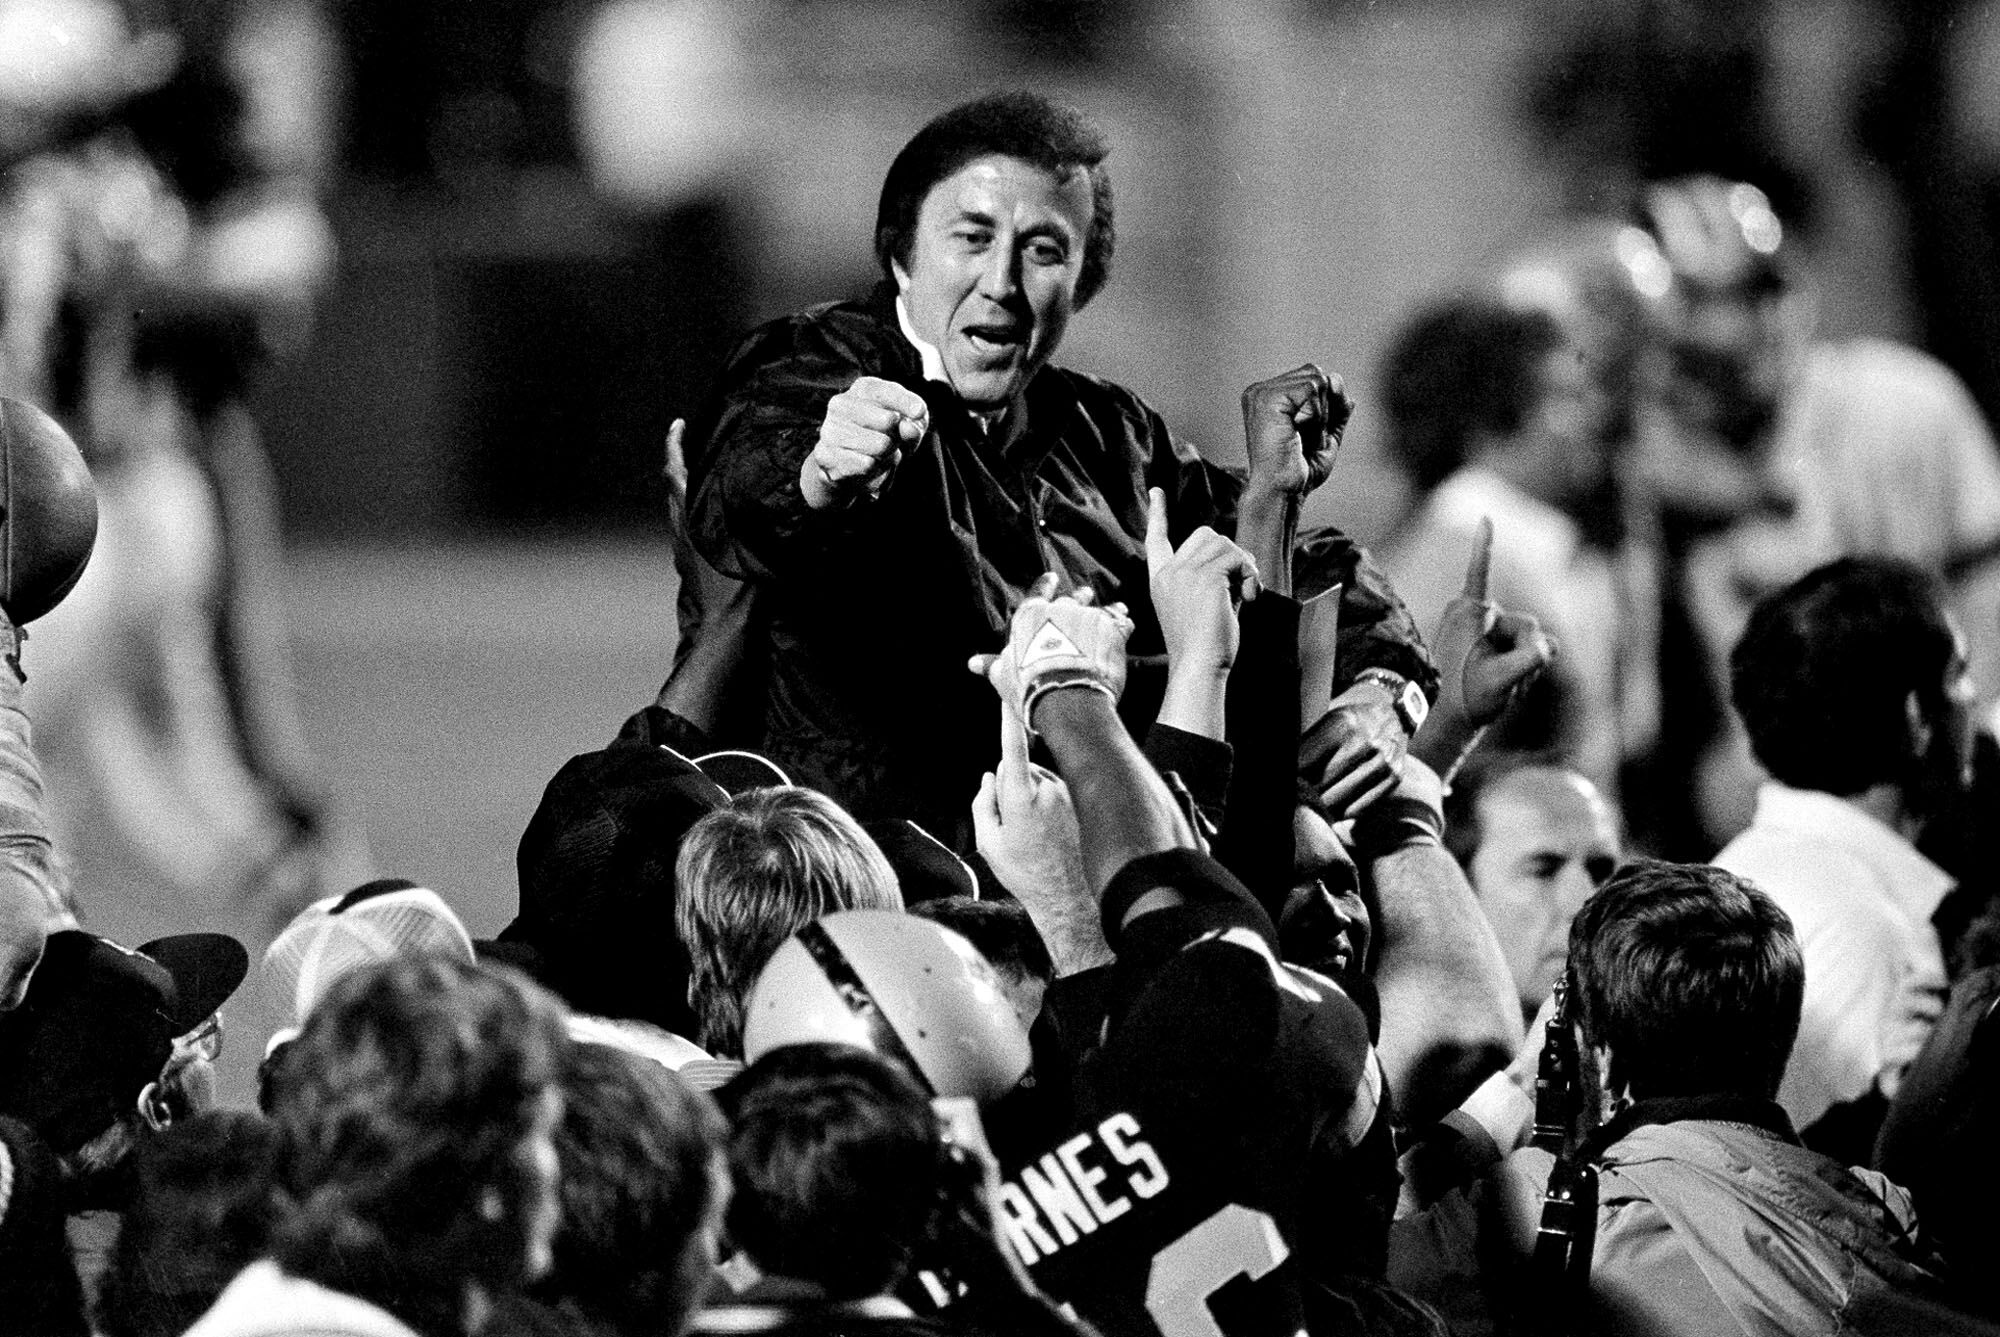 Coach Tom Flores celebrates with Raiders players after winning Super Bowl XVIII on Jan. 23, 1984.